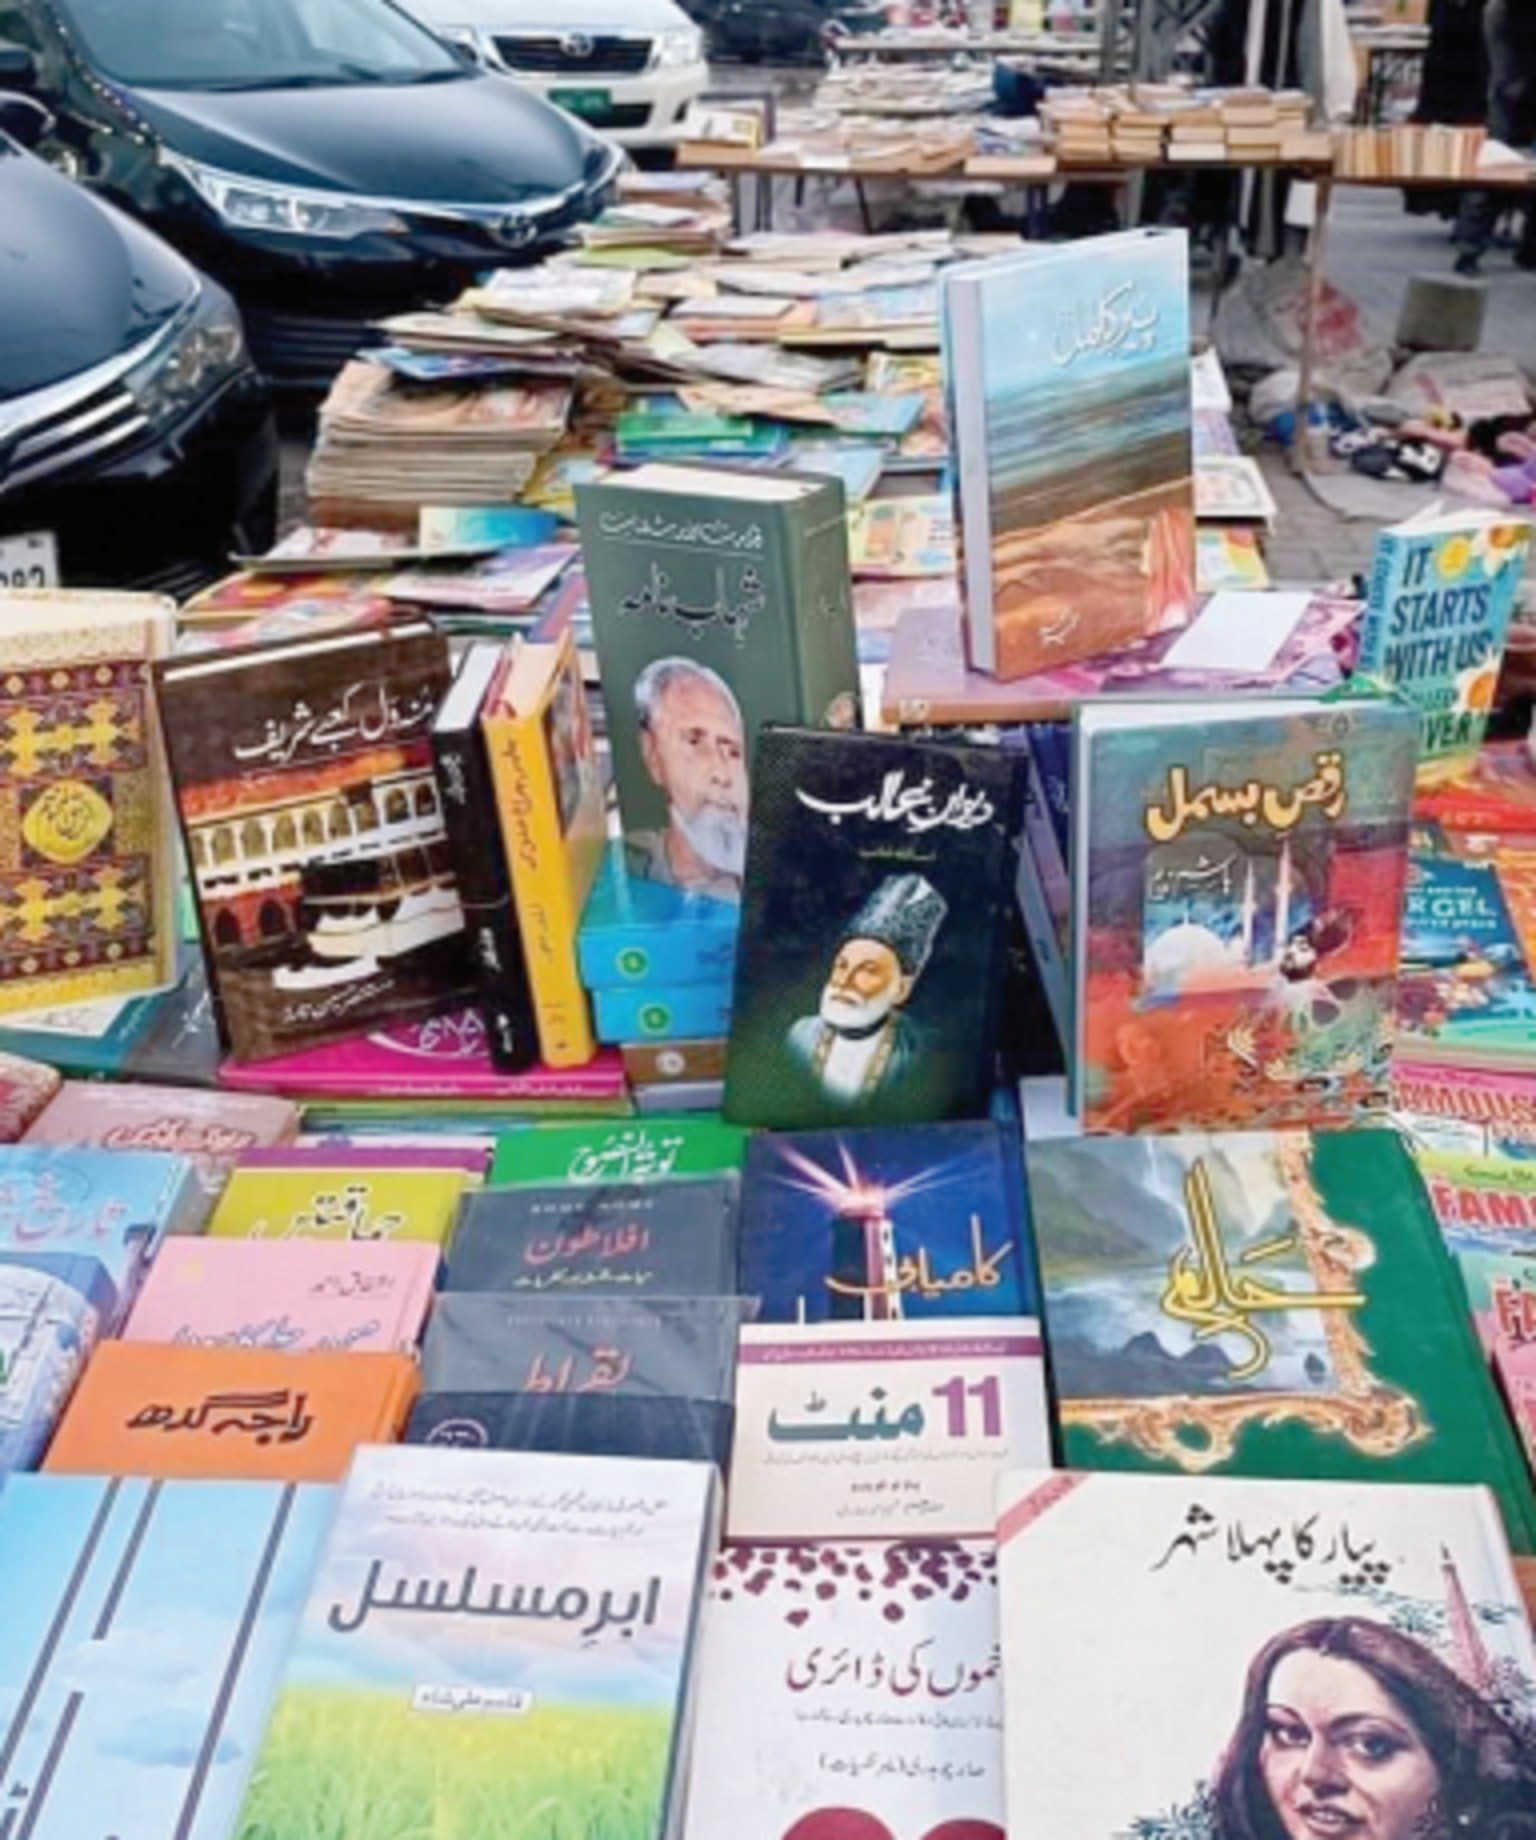 the culture of selling books along sidewalks is dying away photo express